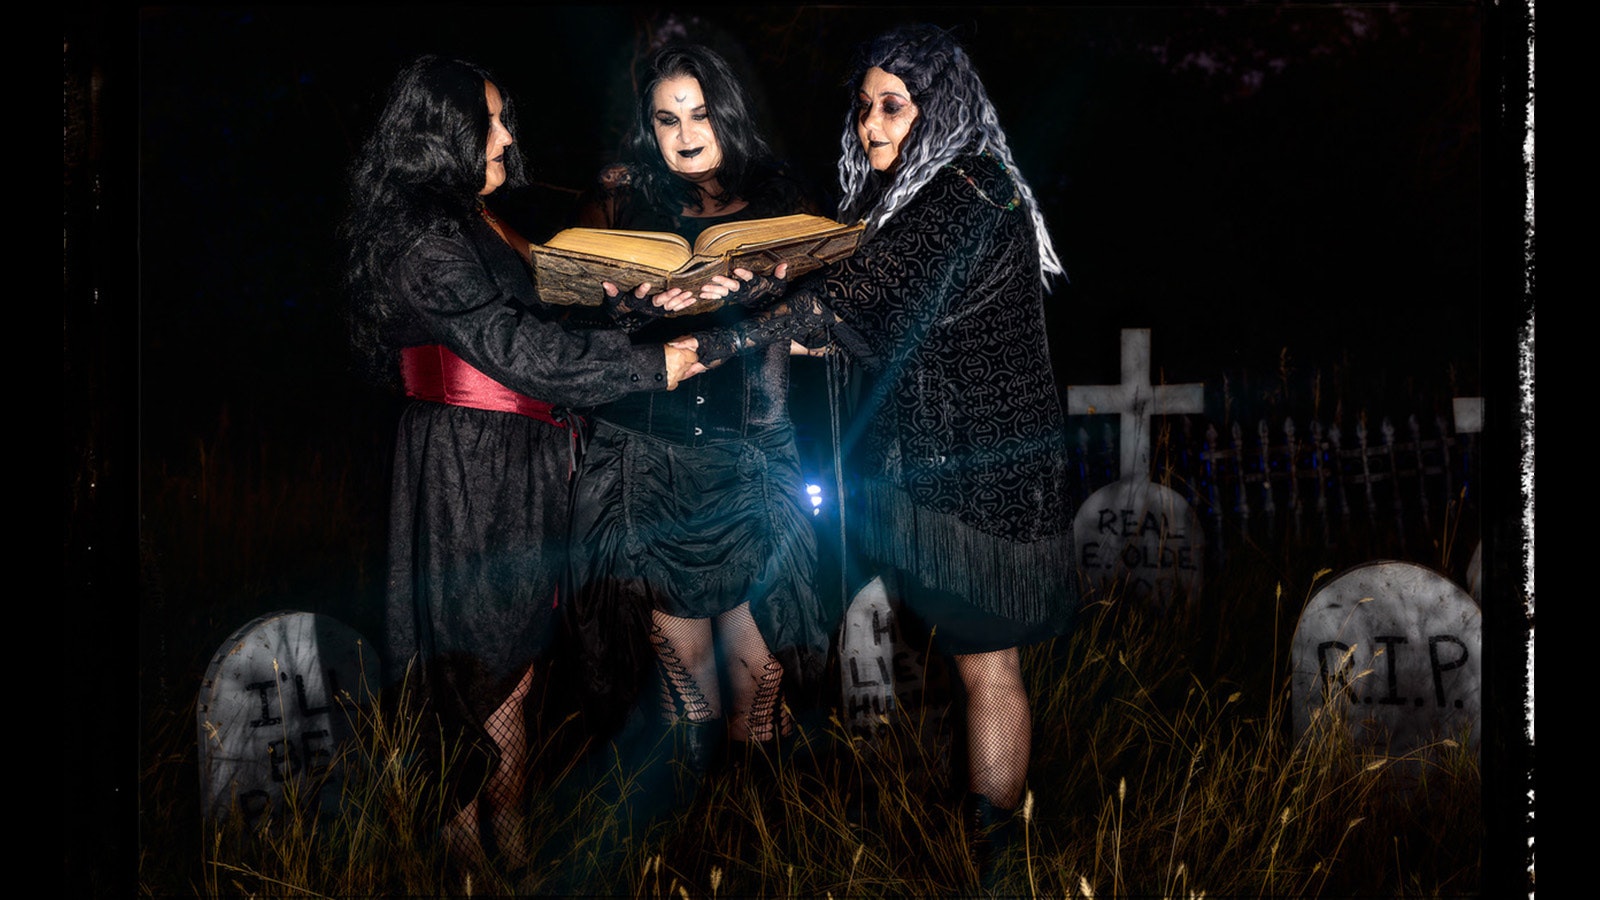 Desiree Ross, Melissa Goode and Sheena Tilley conjure up some spirits in their spooky graveyard.